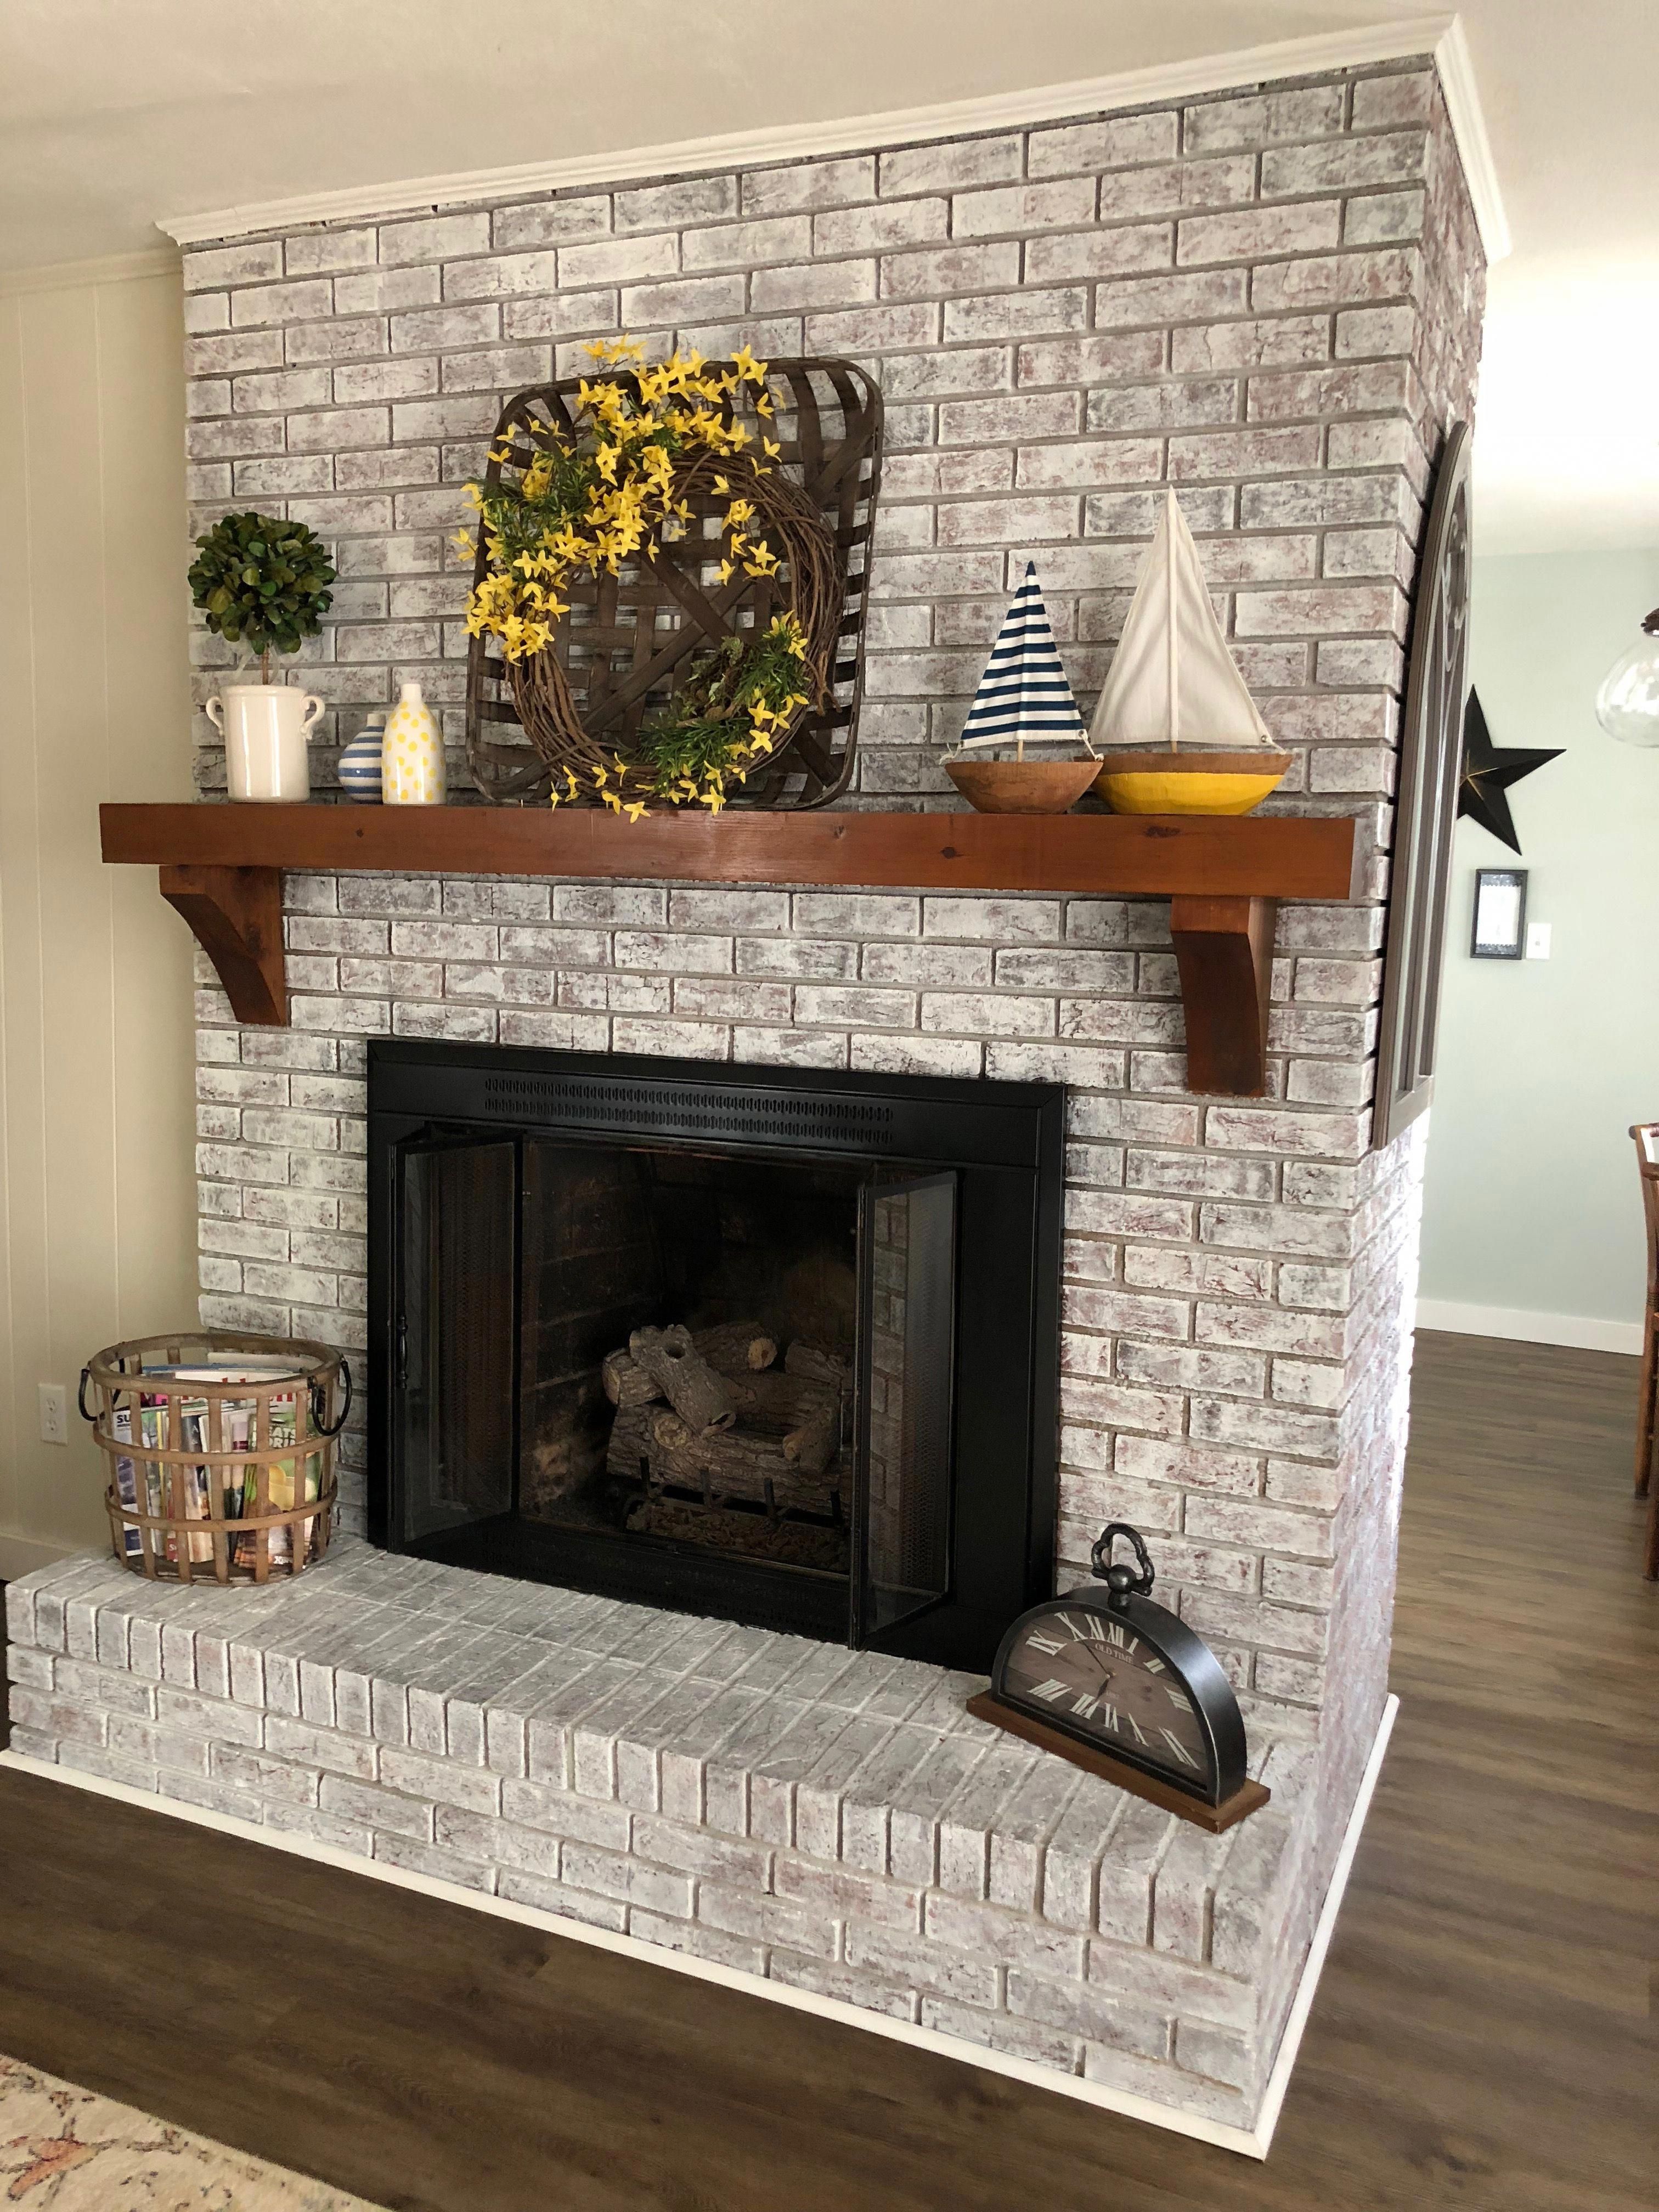 Fireplace Remodel Diy New Painted Brick Fireplace Sw Pure White Over Dark Red Brick